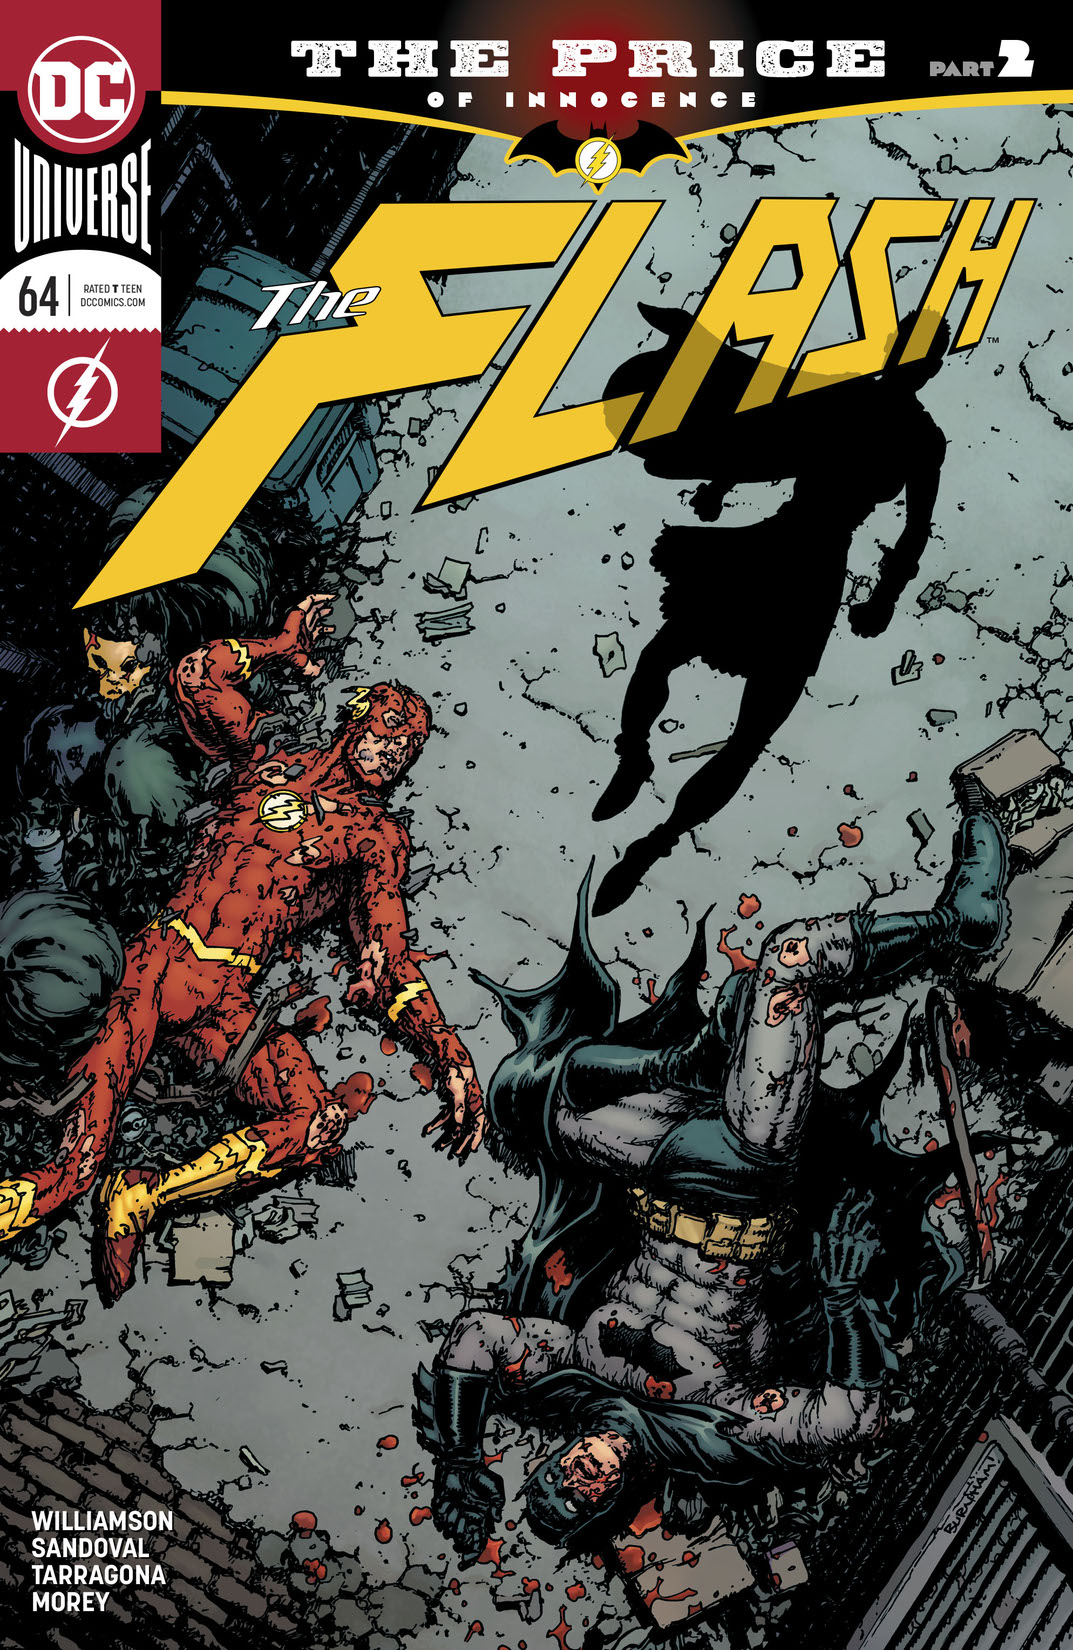 The Flash (2016-) #64 preview images